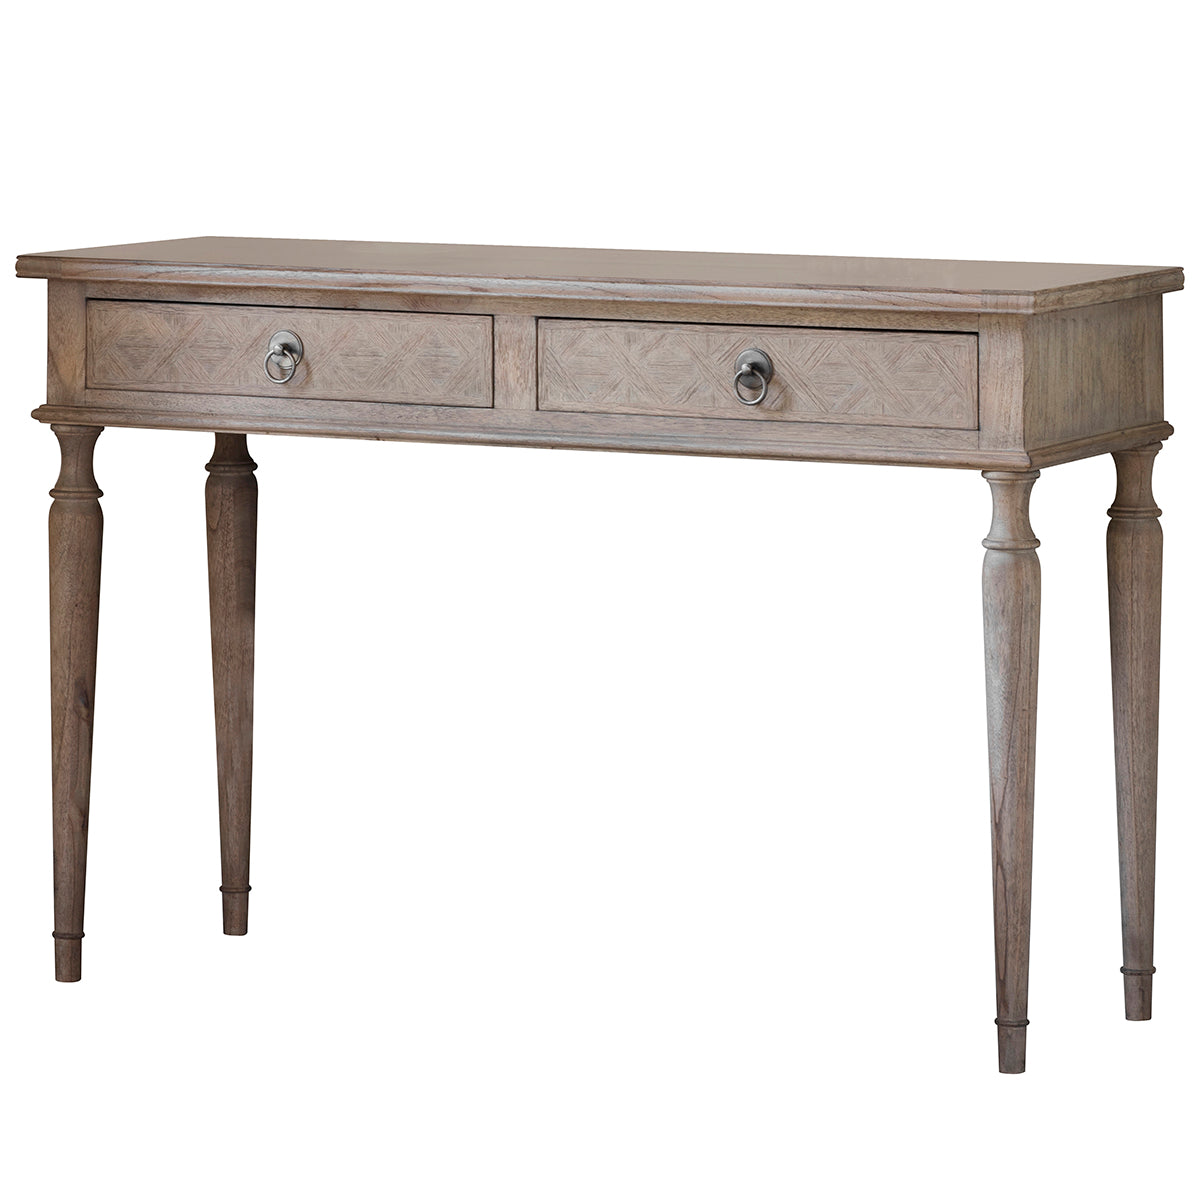 A Belsford Dressing Table 1200x400x800mm with two drawers for interior decor.